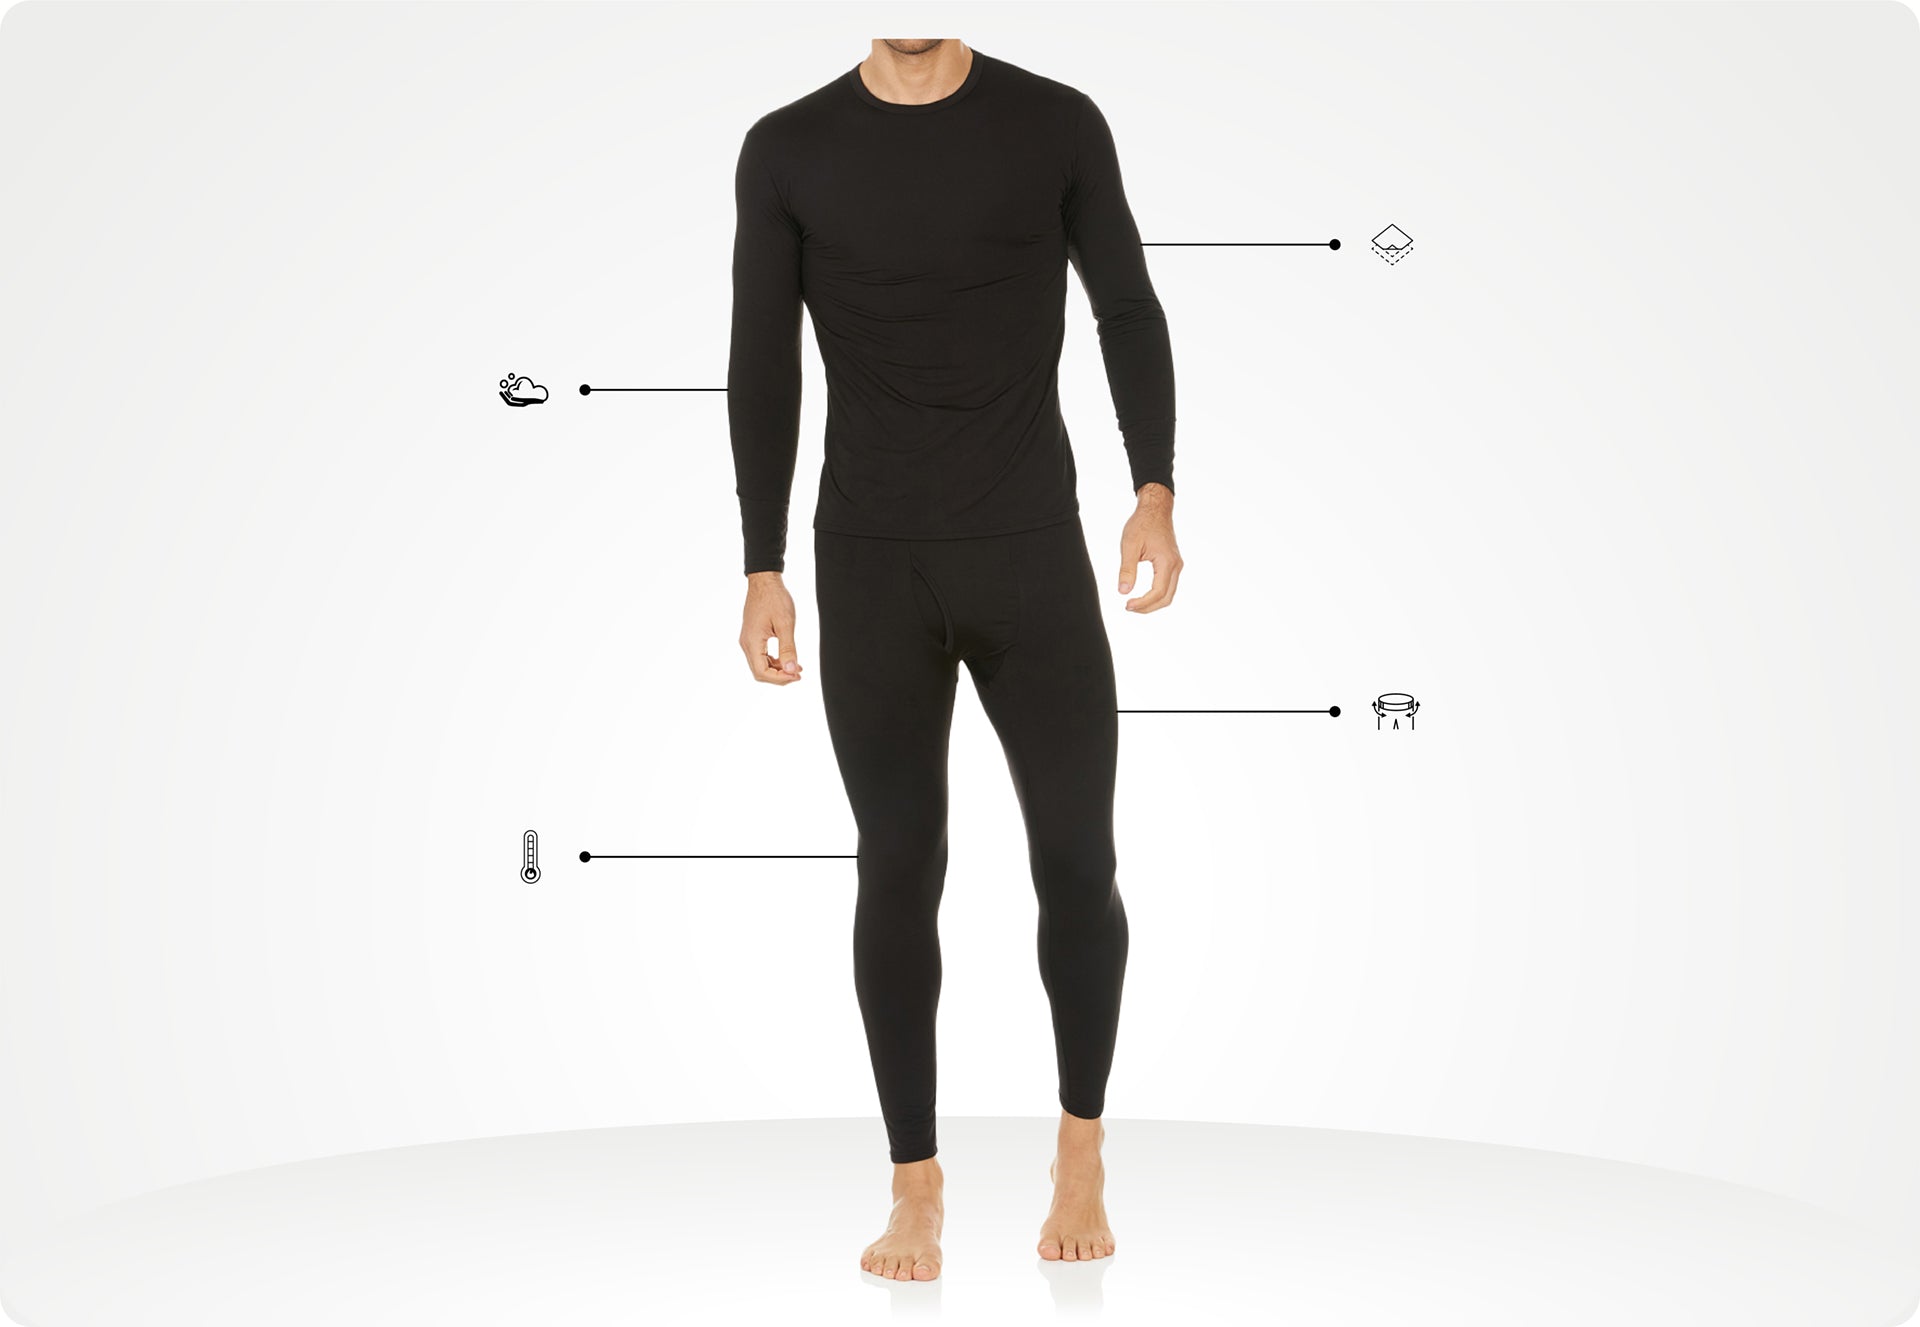 Compression and Thermal Wear Fabric Guide